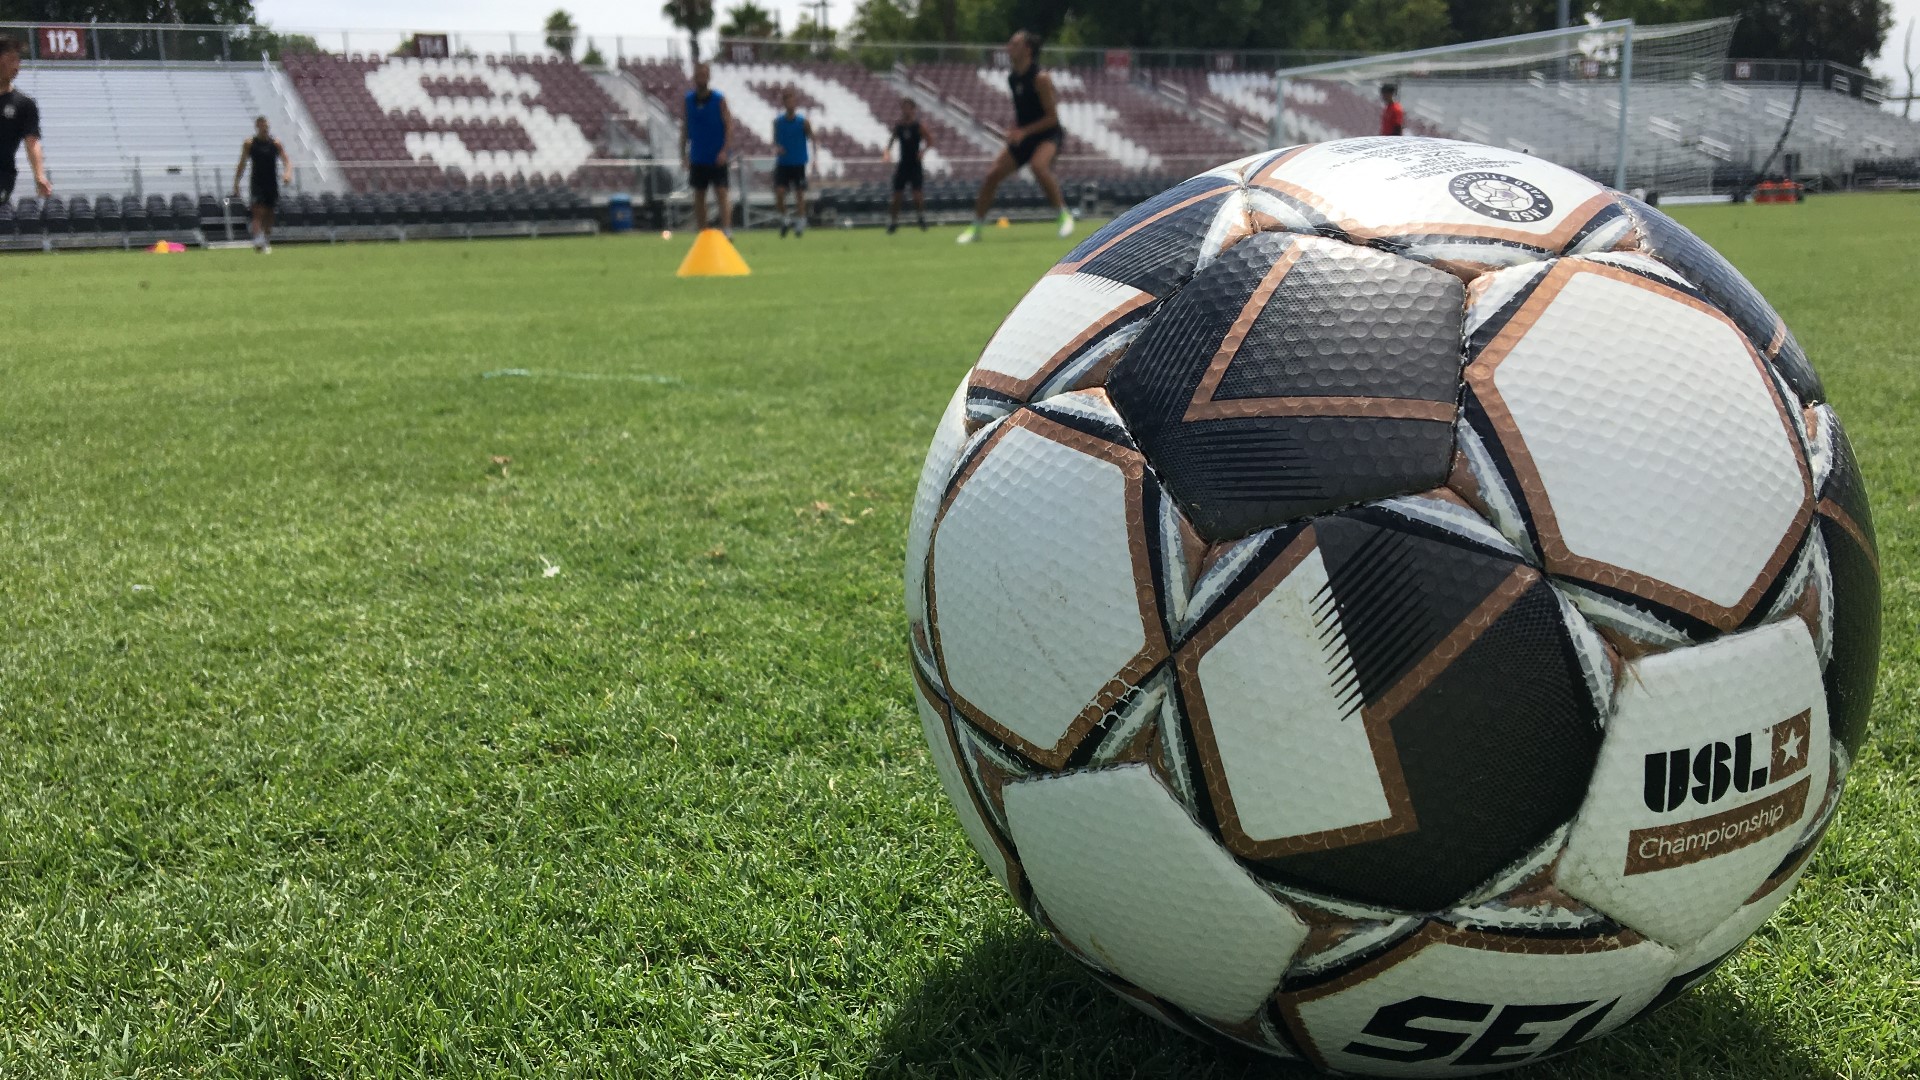 This Wednesday night, Sacramento Republic FC will make some history before their match even begins. For the first time in the history of the franchise, Republic FC will be playing in a nationally televised game on ESPNews. The club will be taking this opportunity to show the nation what they're made of!